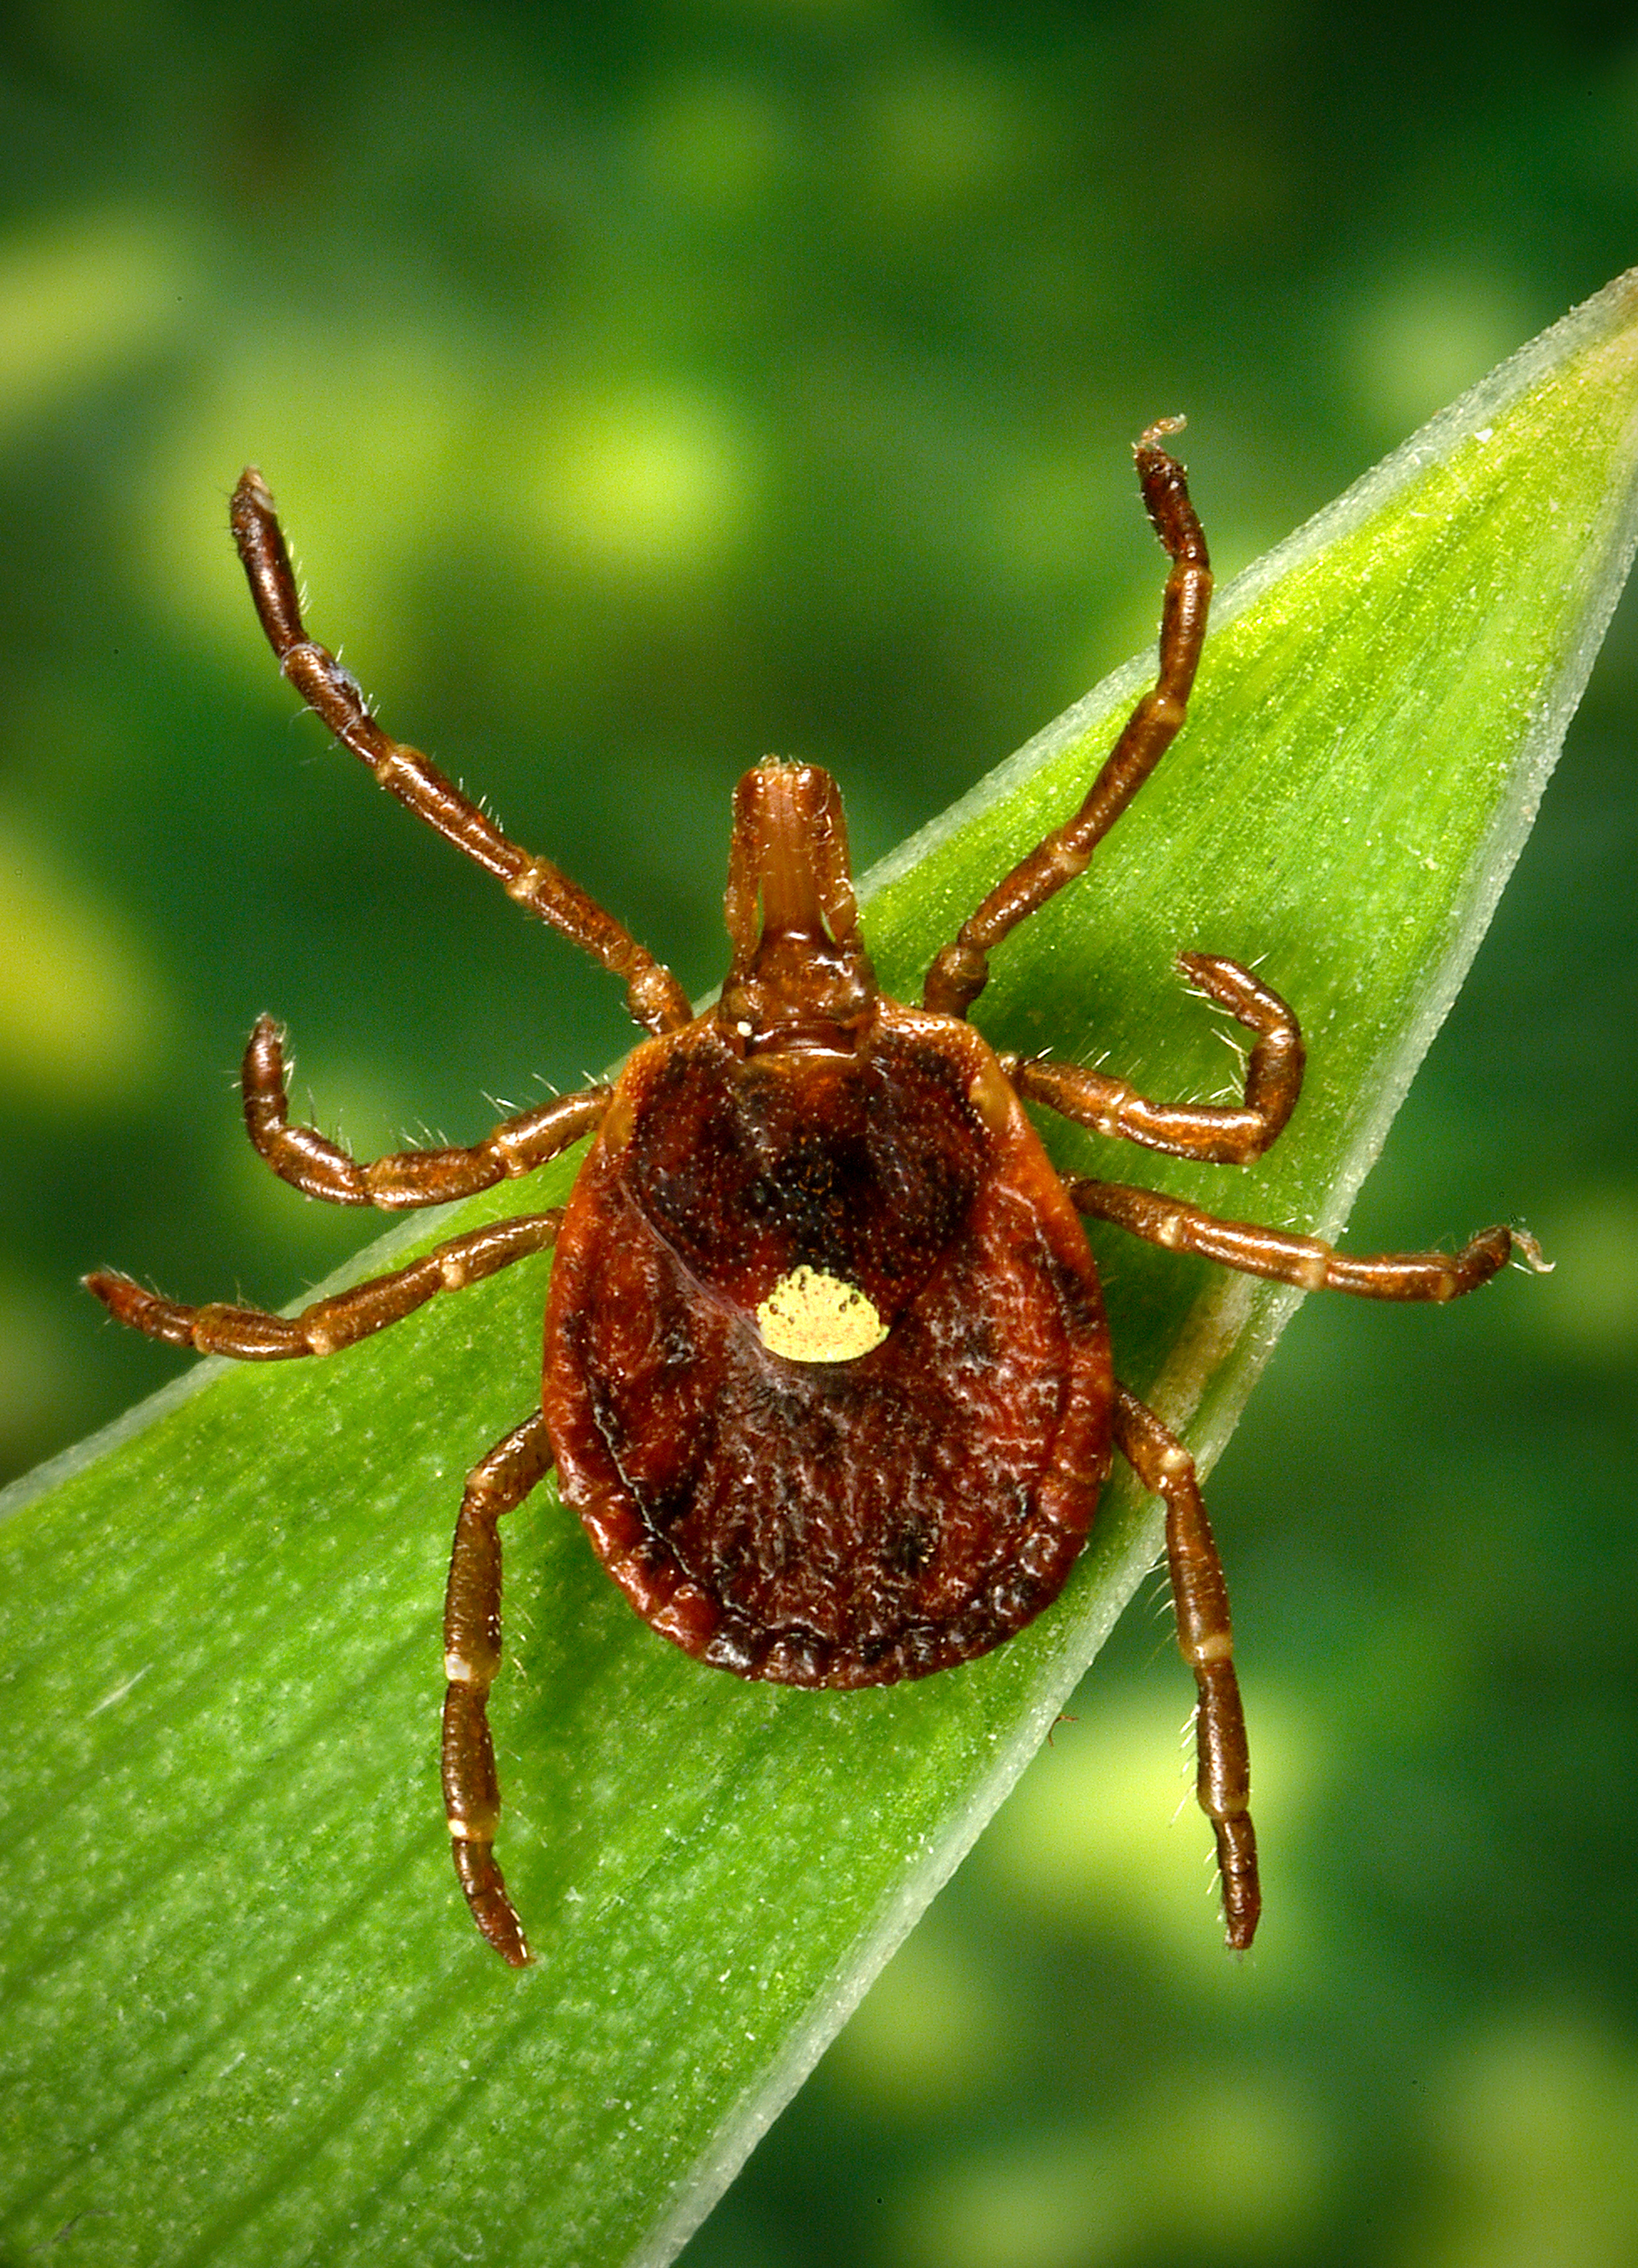 Female lone star tick (Getty Images/Kallista Images)